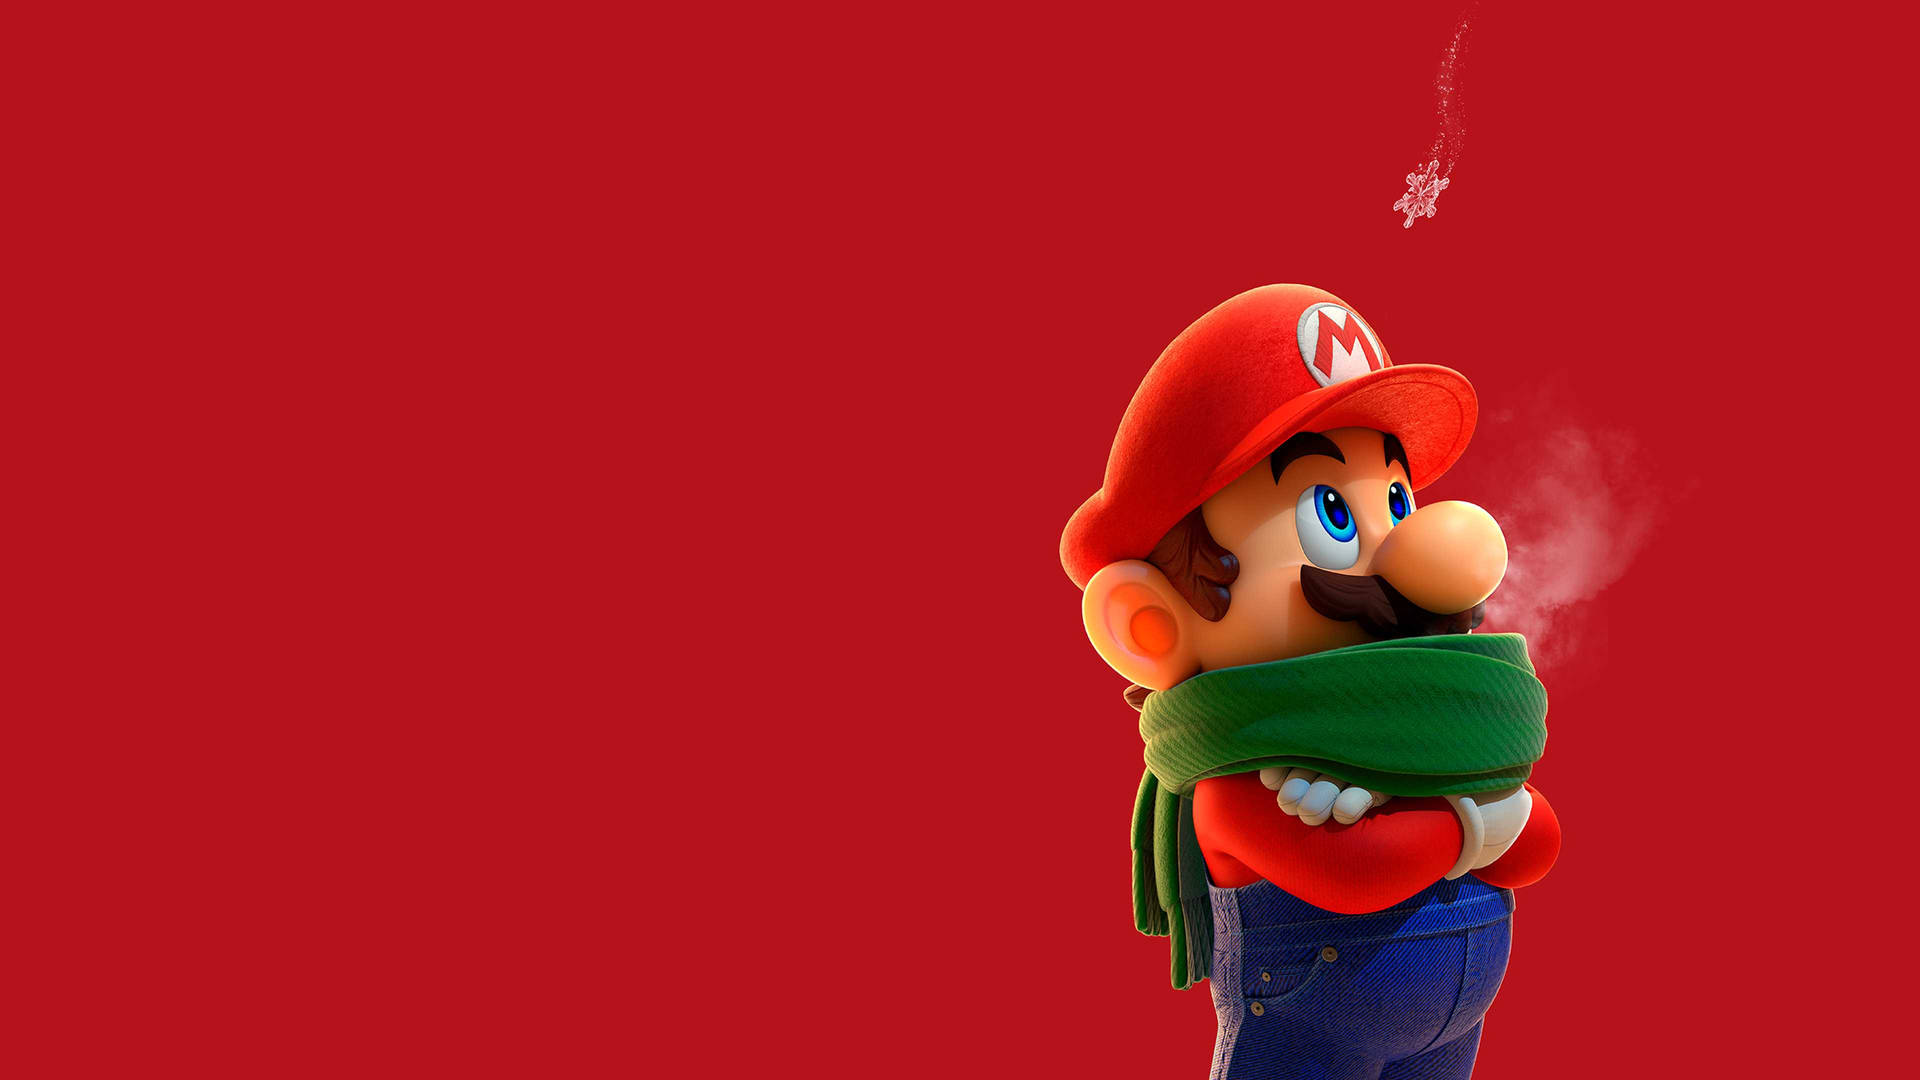 Nintendo Mario Character Red Poster Background